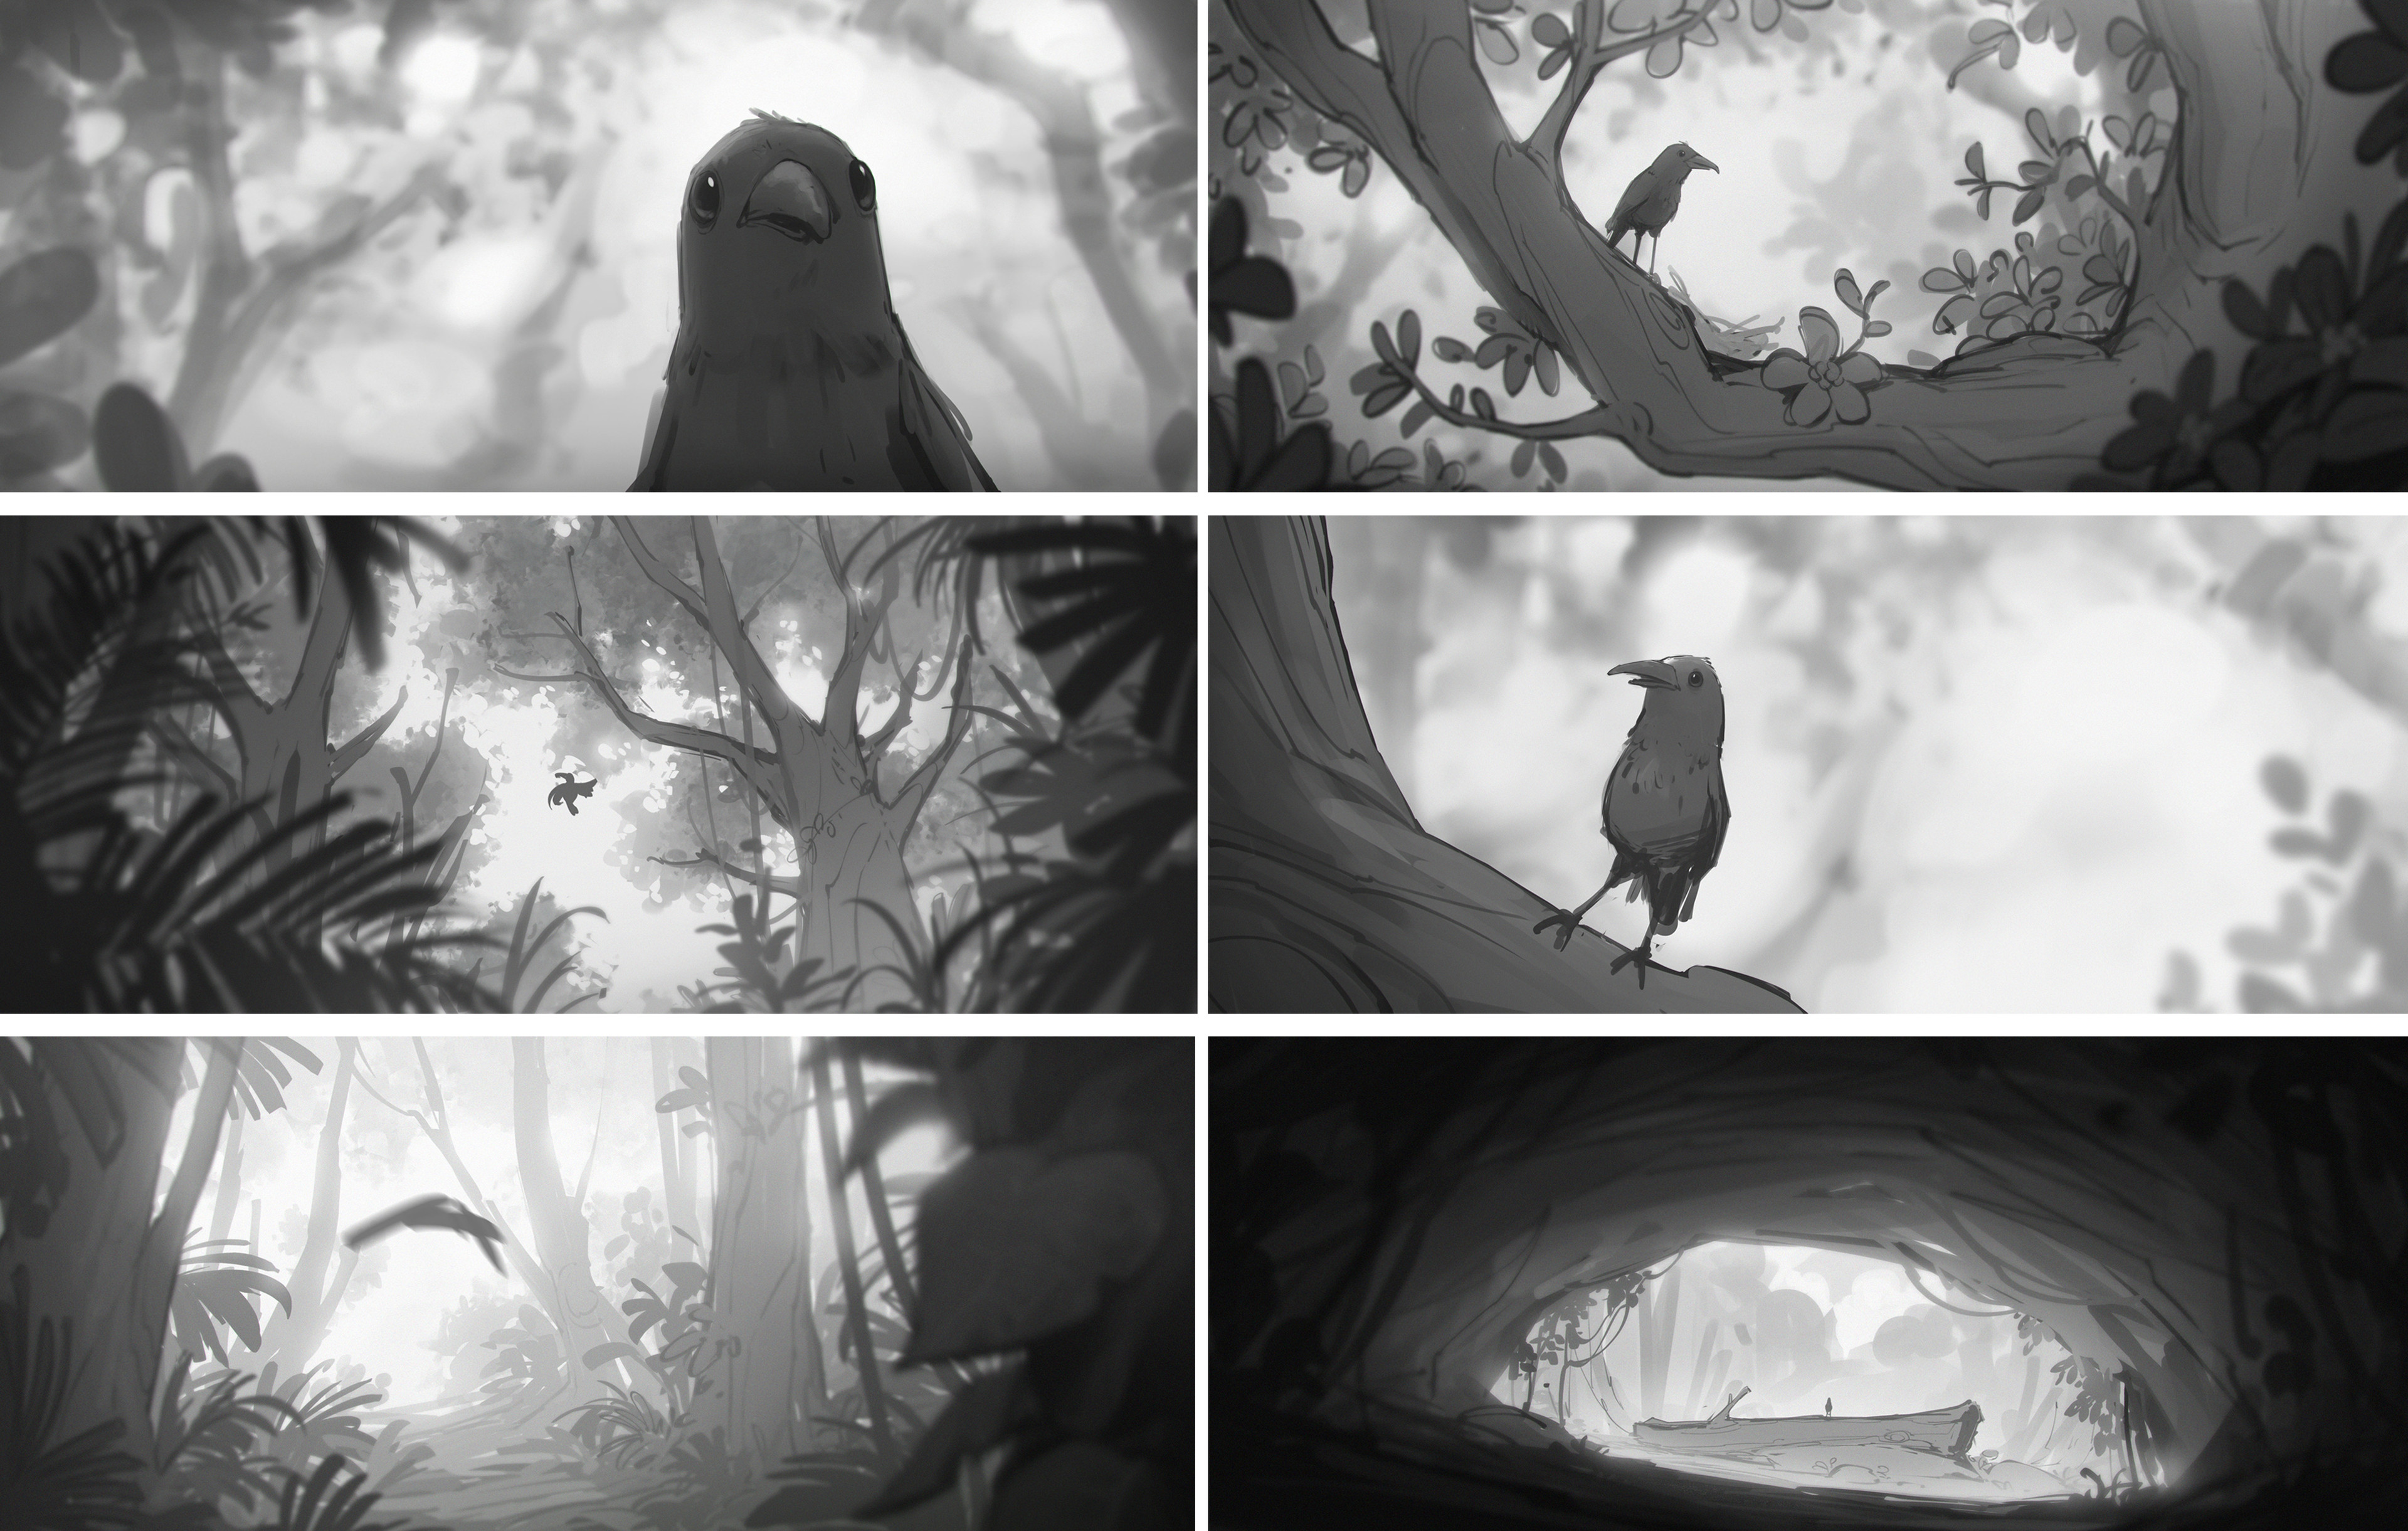 A selection of early rough compositions from the pitch deck - most of the shots in the final film stayed pretty close to the original pitch animatic